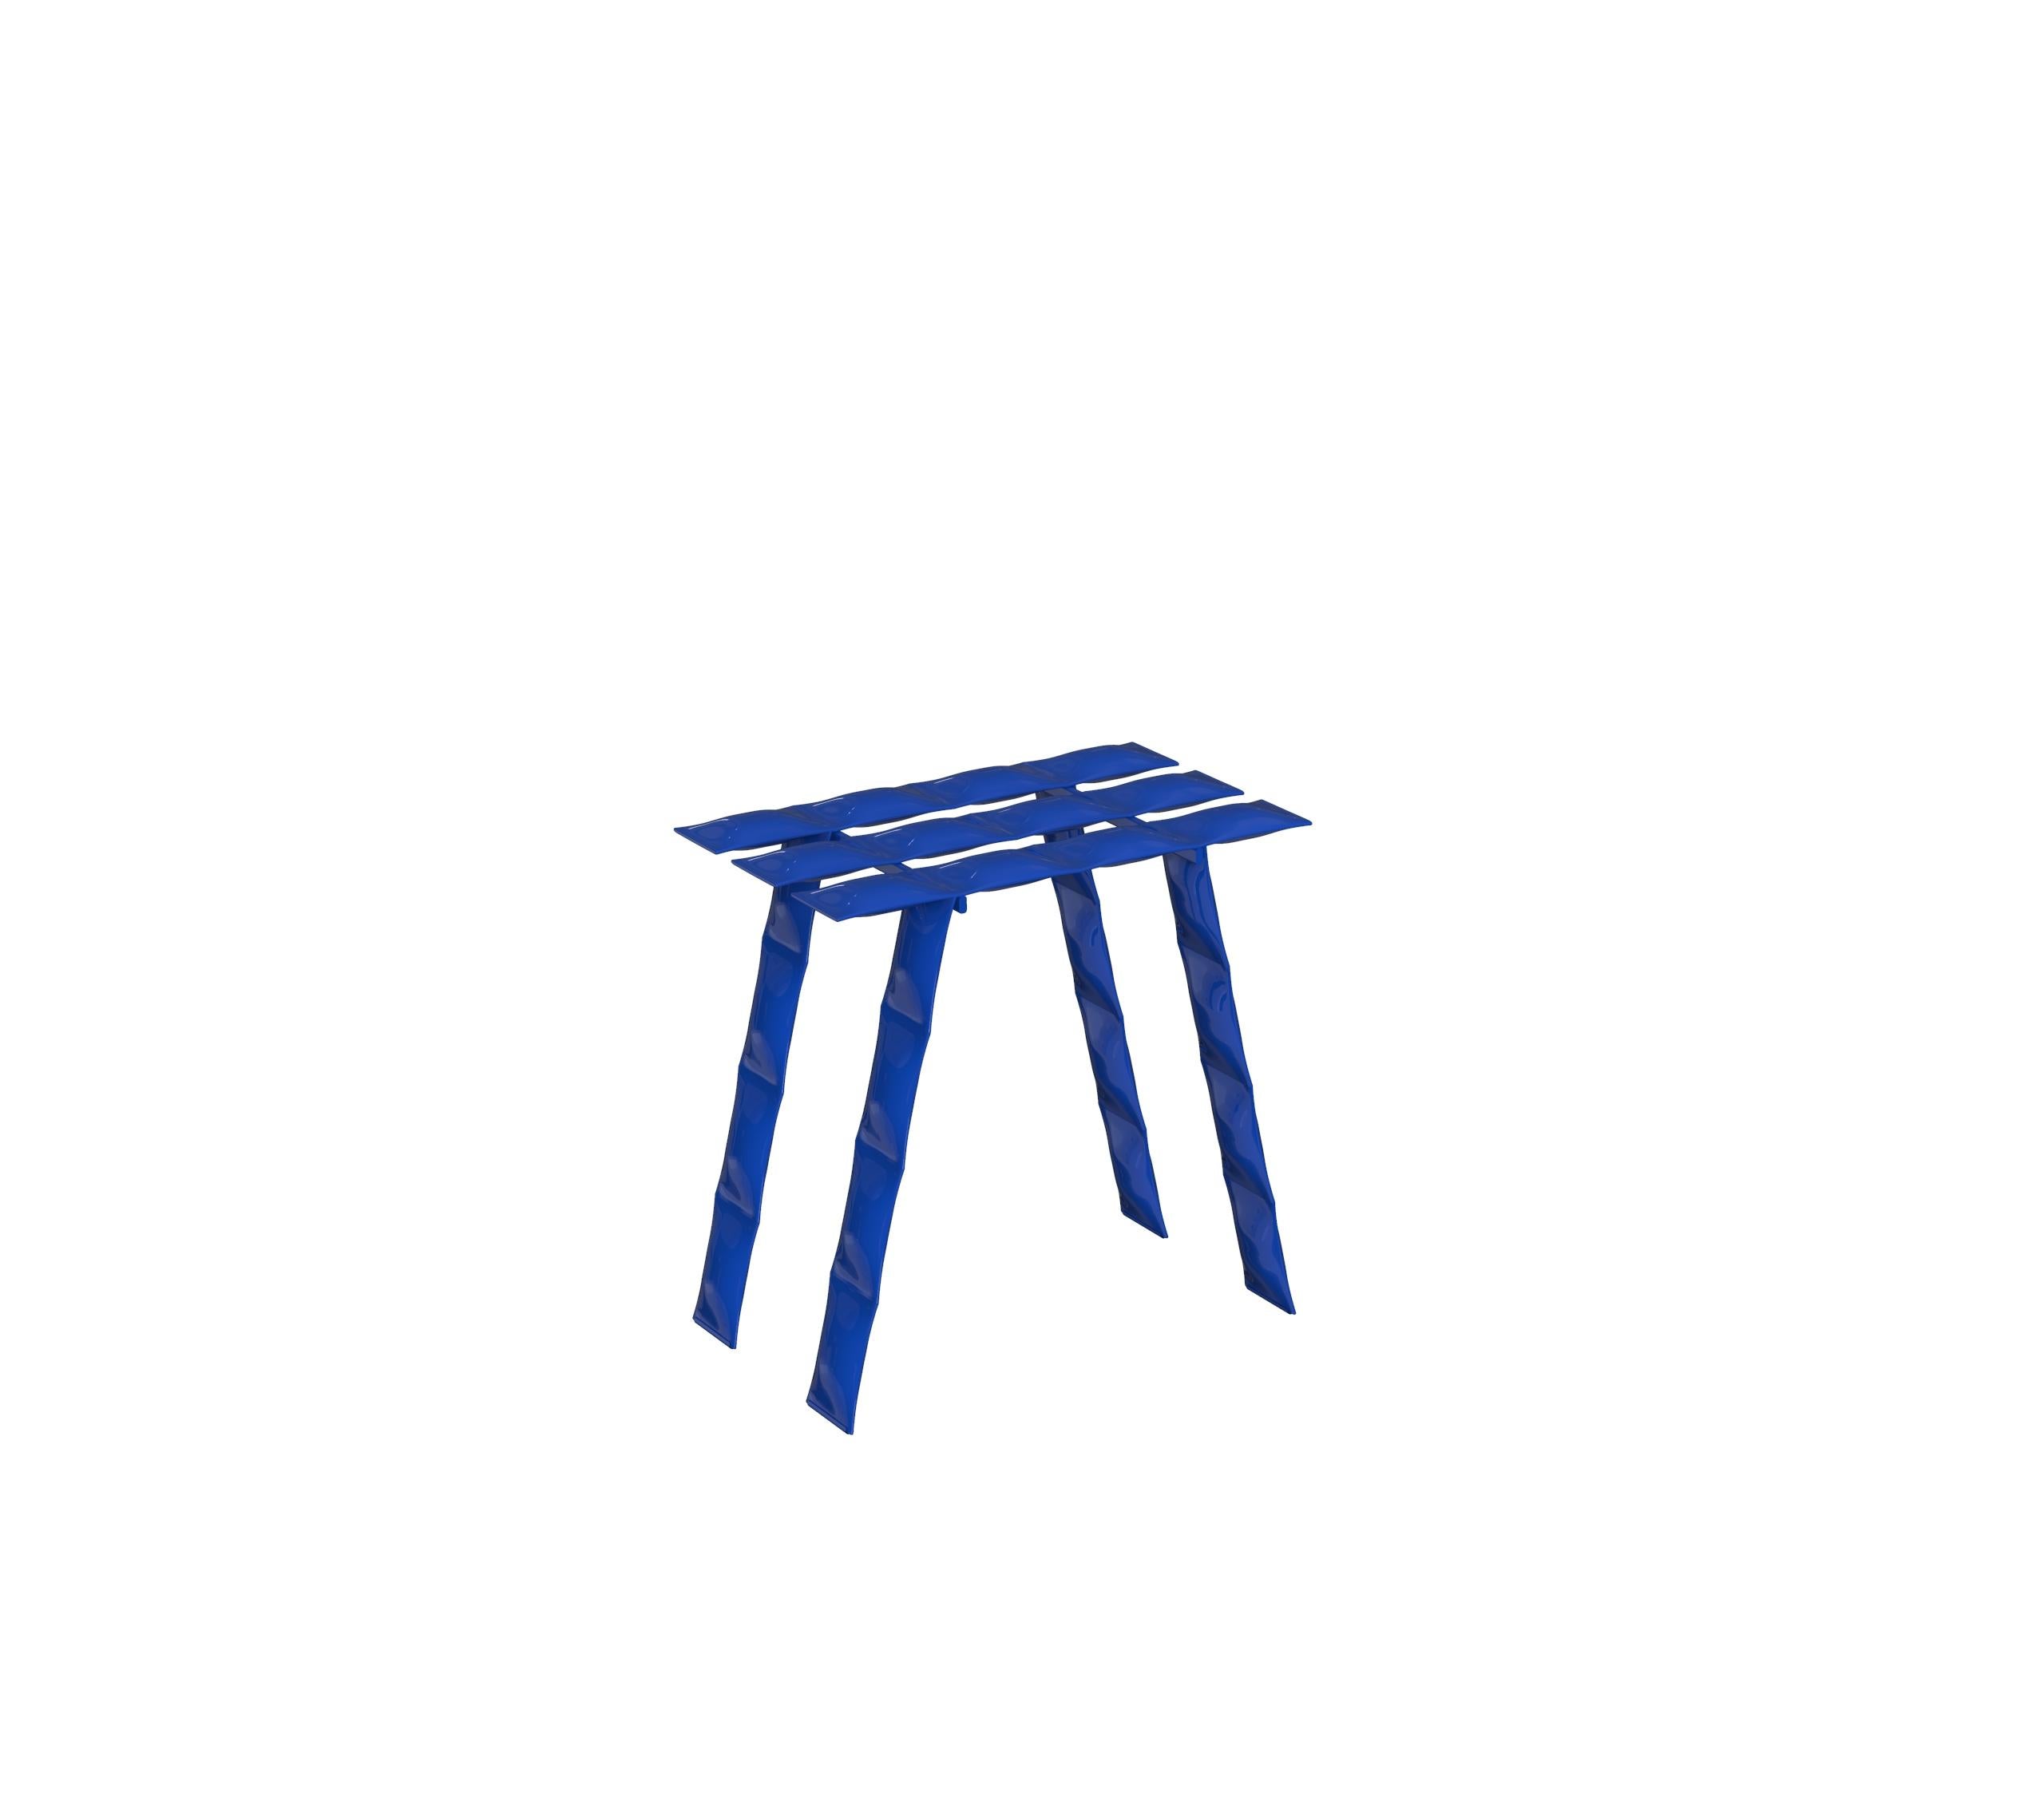 Blue Cosmic Stool by  Mati Sipiora
Dimensions: D 35 x W 40 x H 40 cm
Materials: Painted. 
Finish: Glossy powder coating paint.
Weight: 5.5 Kg.
Max User Weight: 100 KG

Mati Sipiora – the creator's story and a new Polish design brand
Mati's adventure